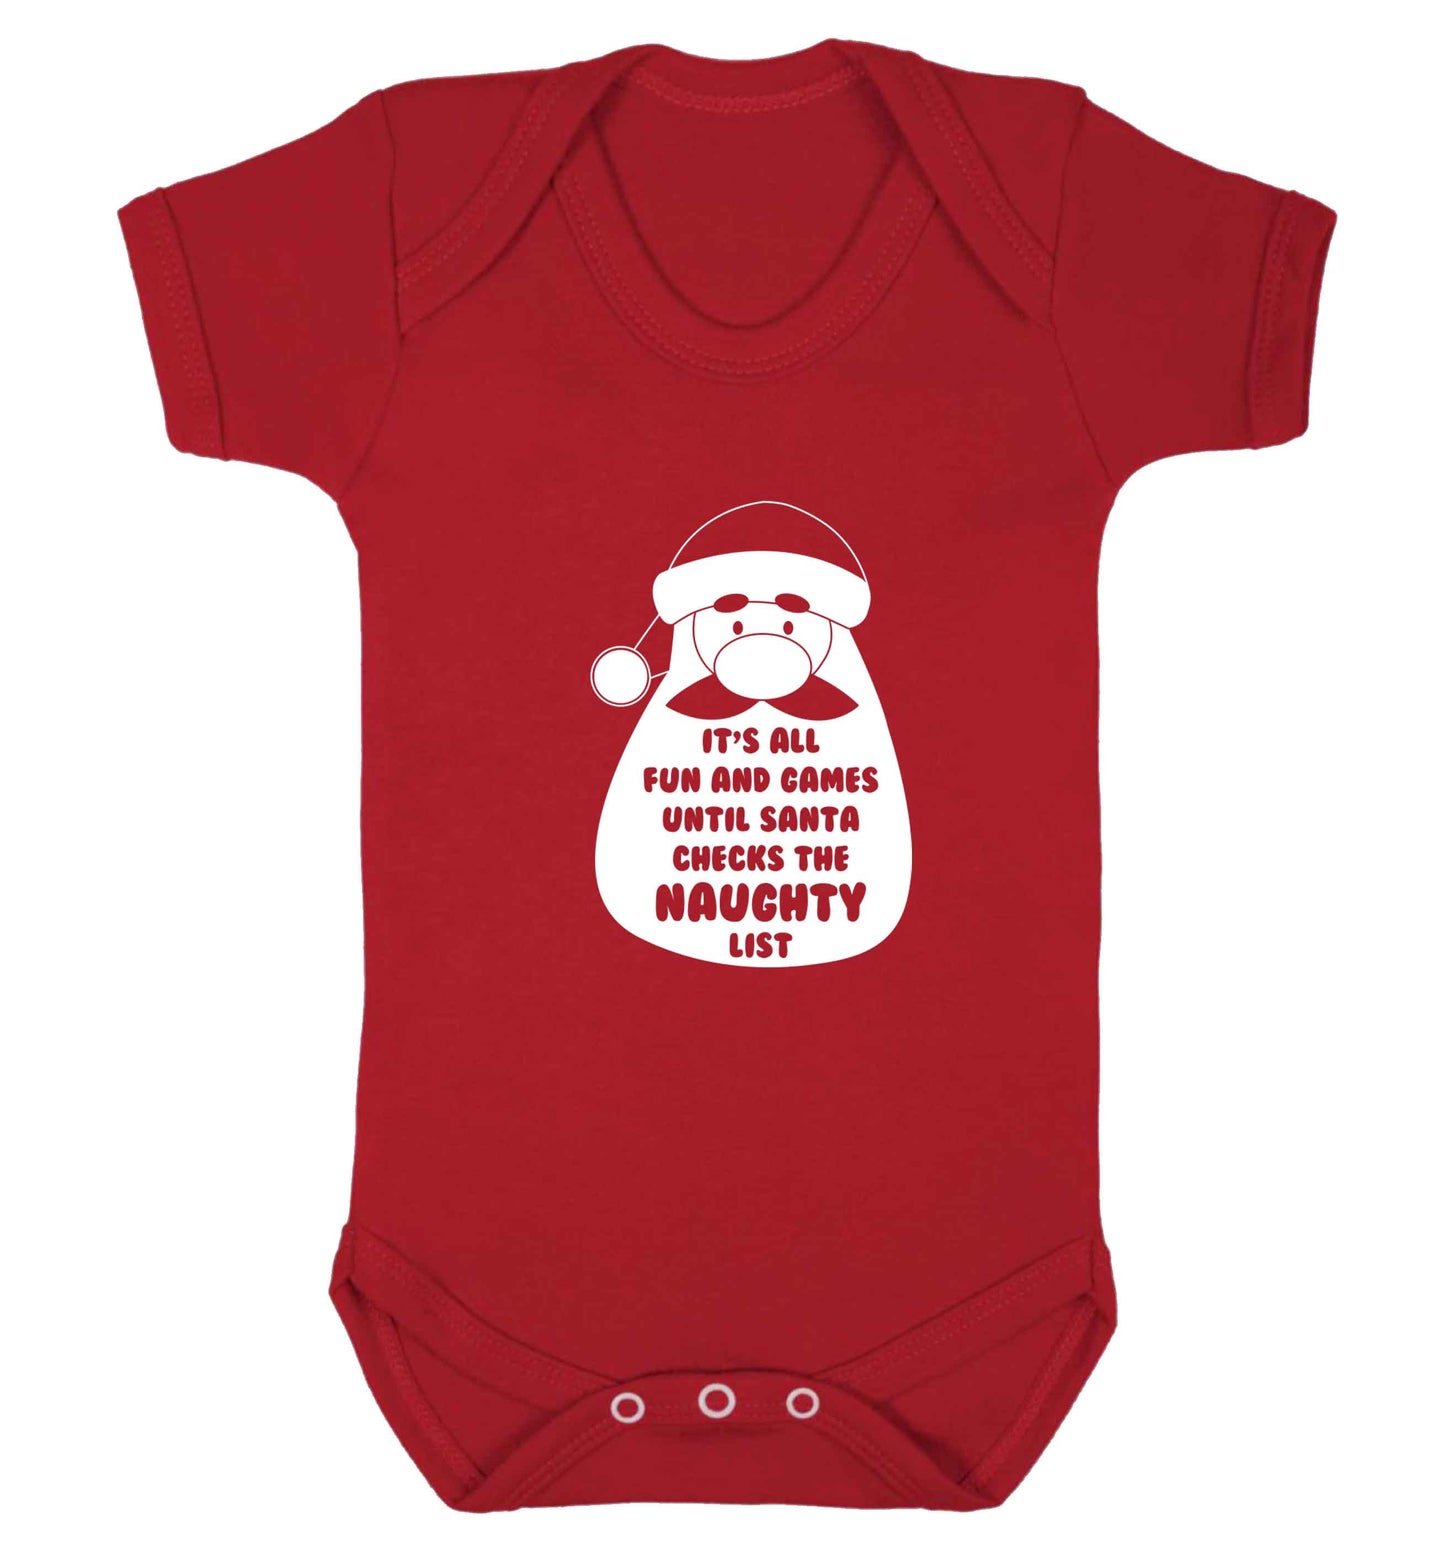 It's all fun and games until Santa checks the naughty list baby vest red 18-24 months